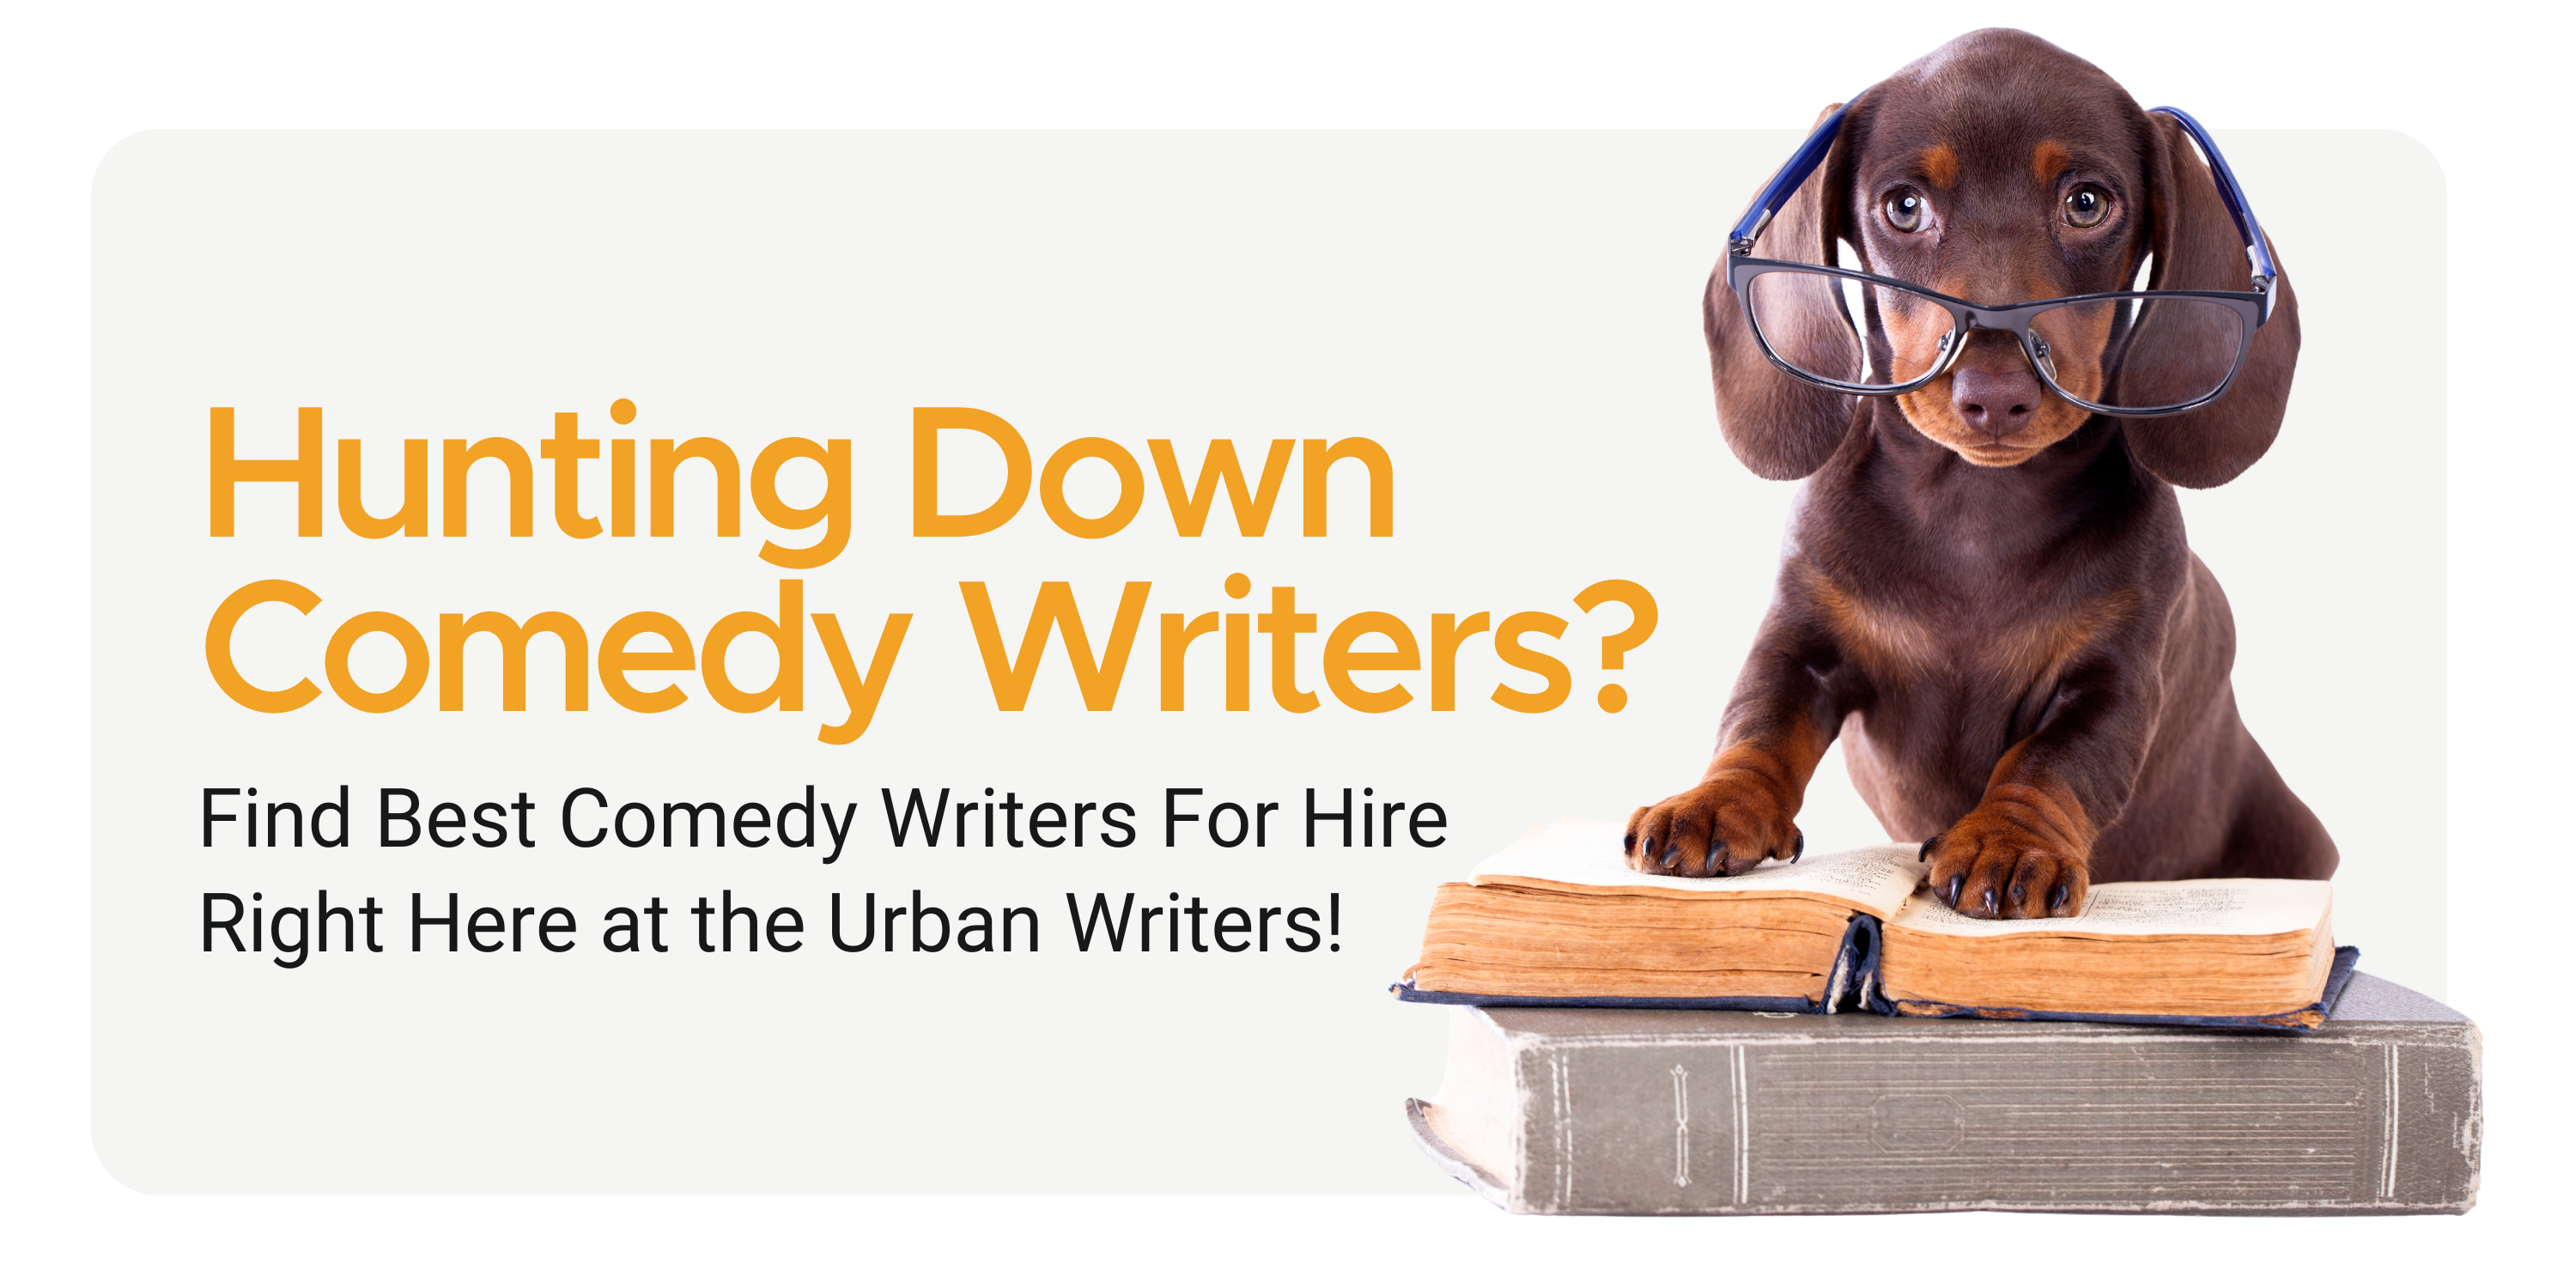 Comedy writers - Comedy writers for hire -Best Comedy writer